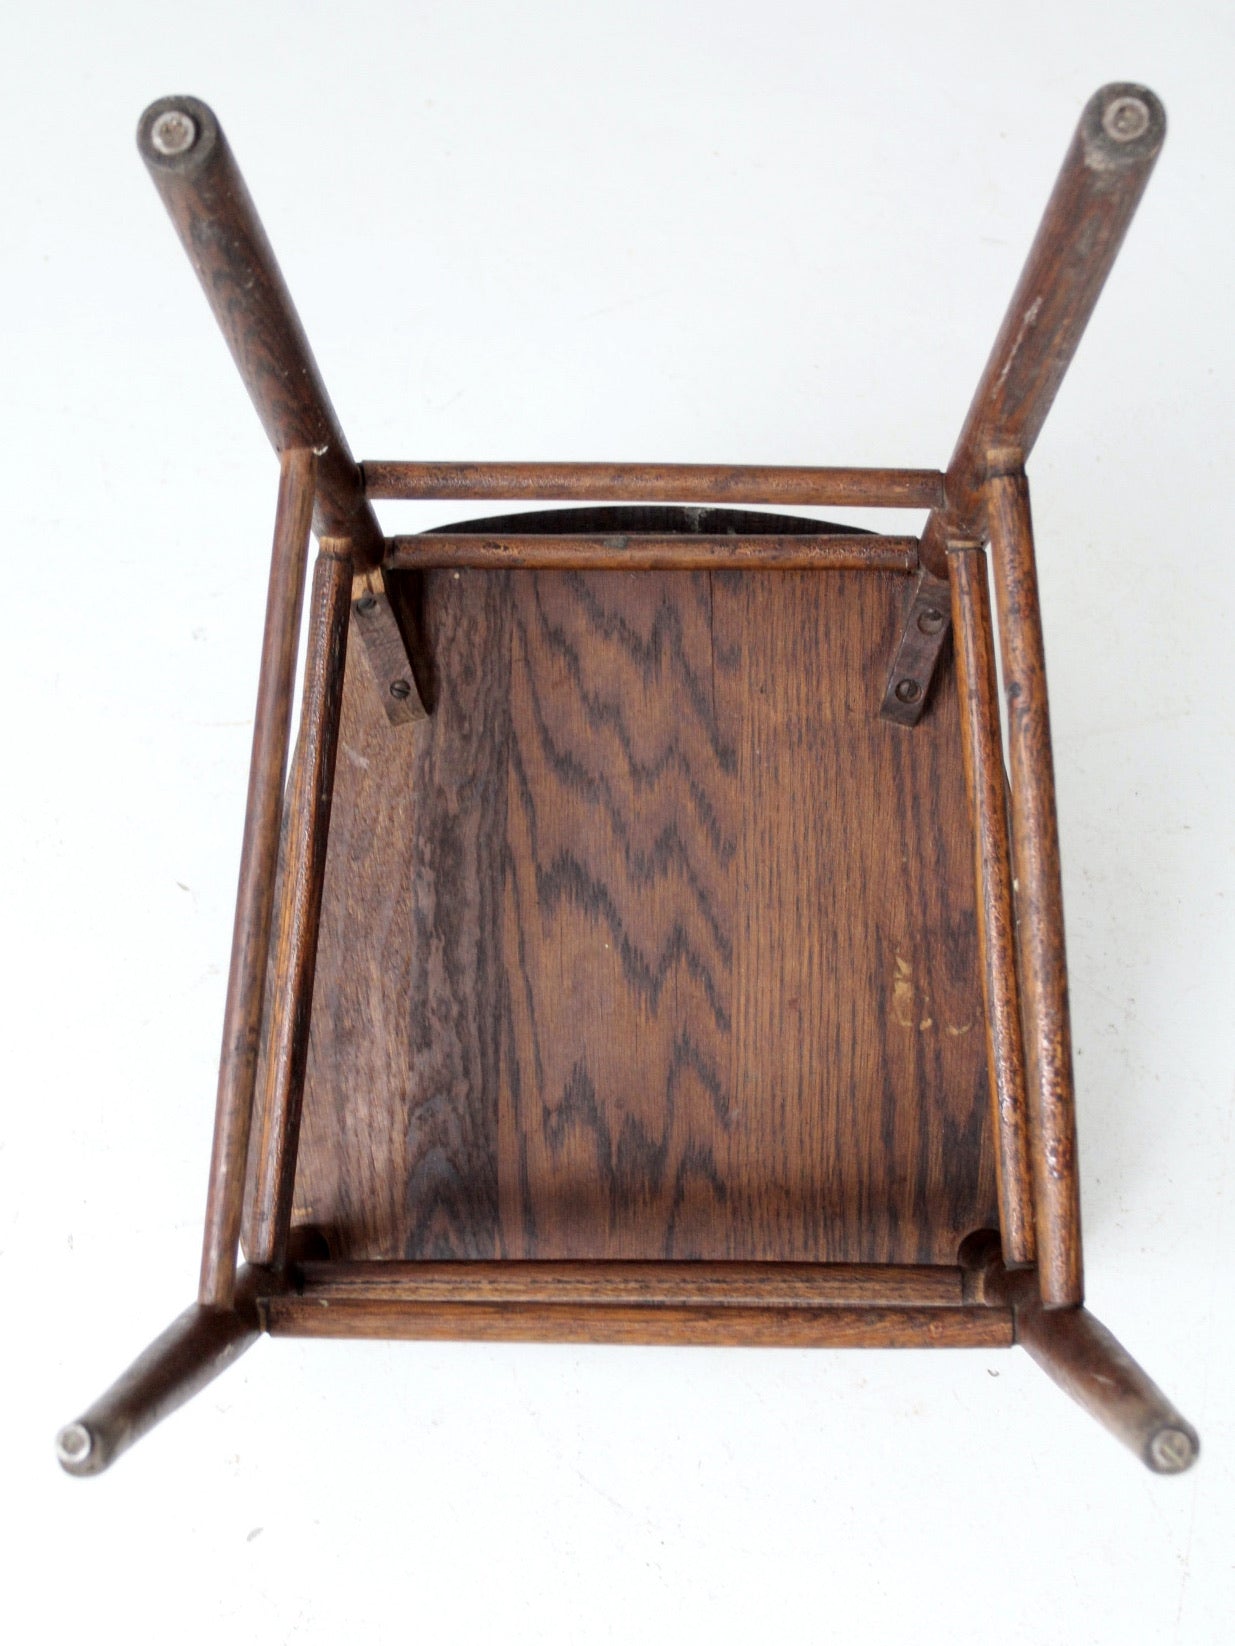 antique accent chair with low back